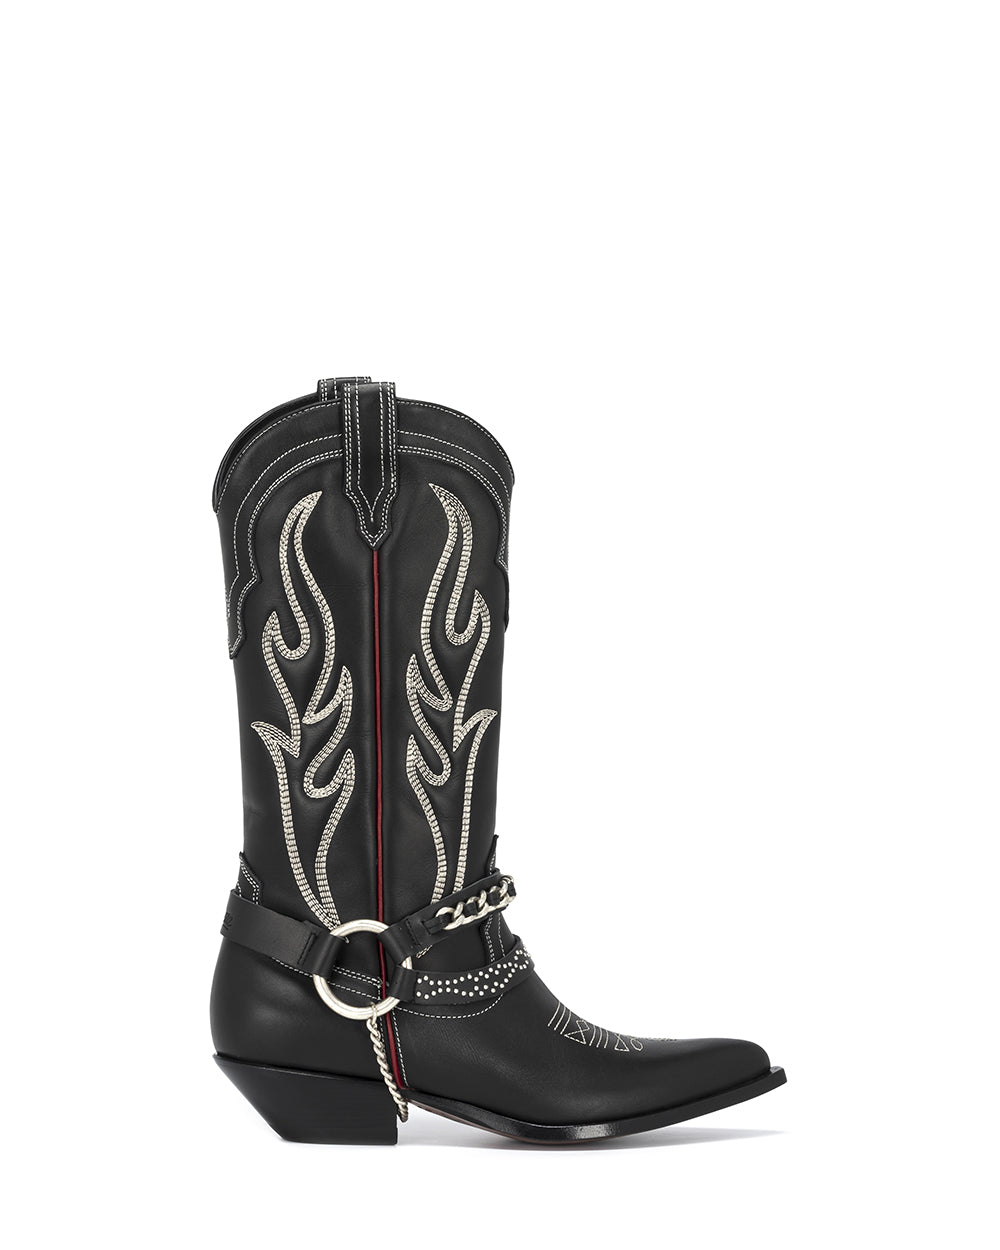 SANTA FE BELT Women's Cowboy Boots in Black Calf with Leather Chain | Ecru Embroidery